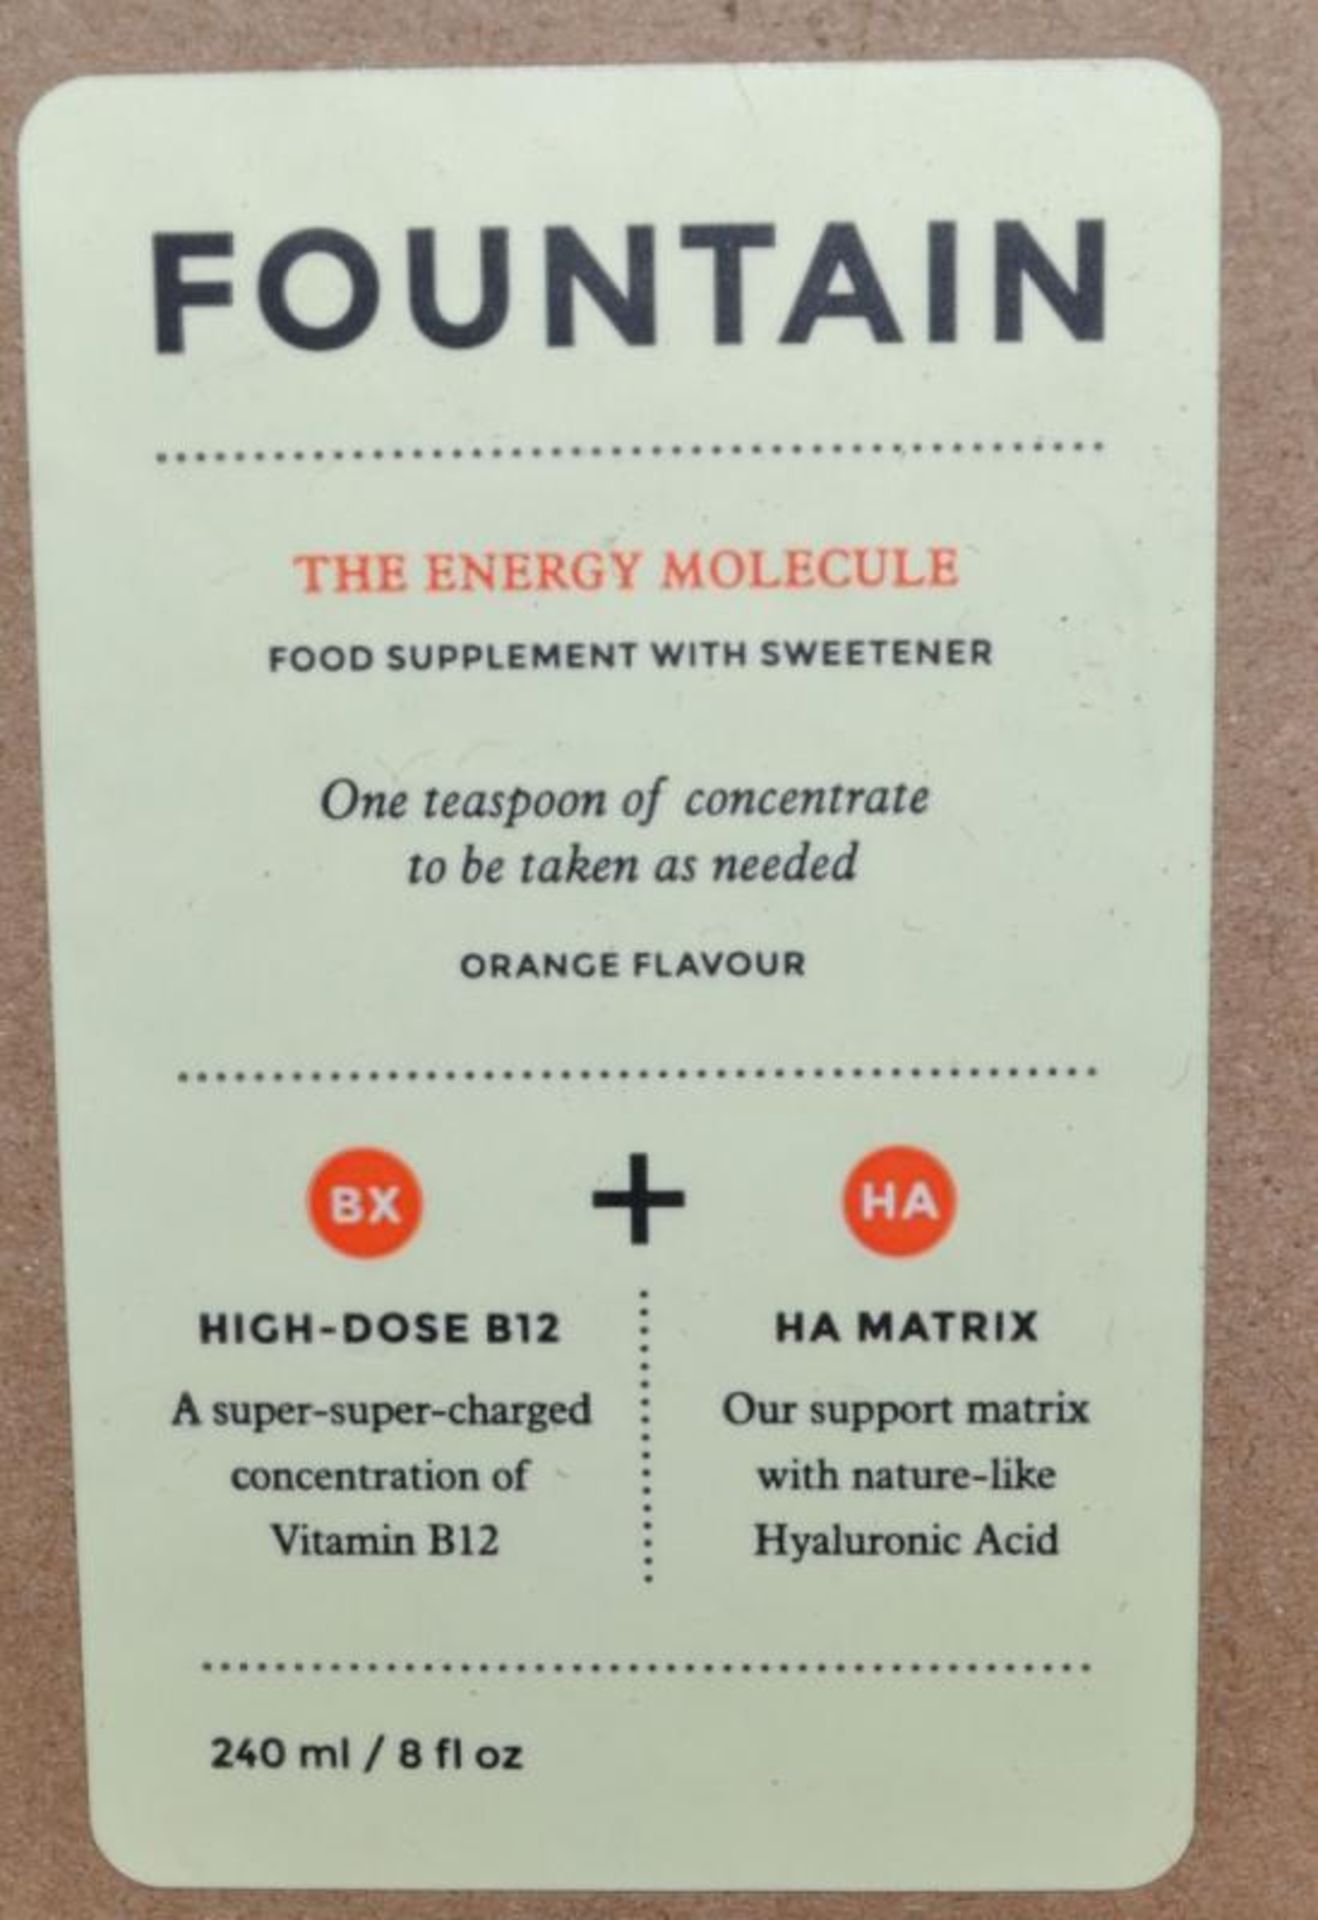 10 x 240ml Bottles of Fountain, The Energy Molecule Supplement - New & Boxed - CL185 - Ref: DRT0643 - Image 2 of 7